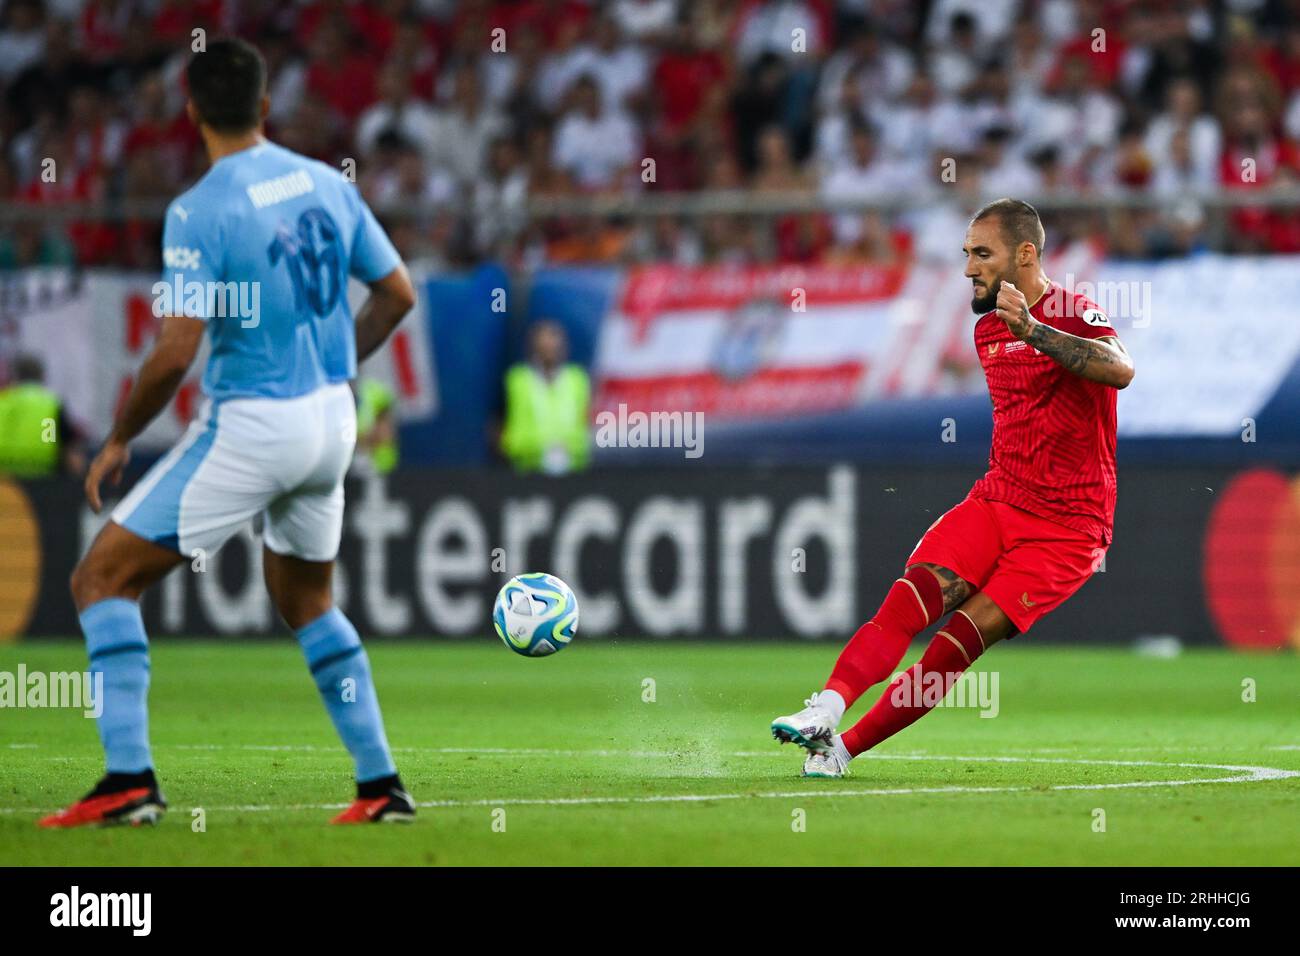 Piraeus, Greece. 16 August, 2023: Nemanja Gudelj of Sevilla in action during the UEFA Super Cup 2023 match between Manchester City FC and Sevilla FC at Georgios Karaiskakis Stadium in Piraeus, Greece. August 16, 2023. (Photo by Nikola Krstic/Alamy) Stock Photo